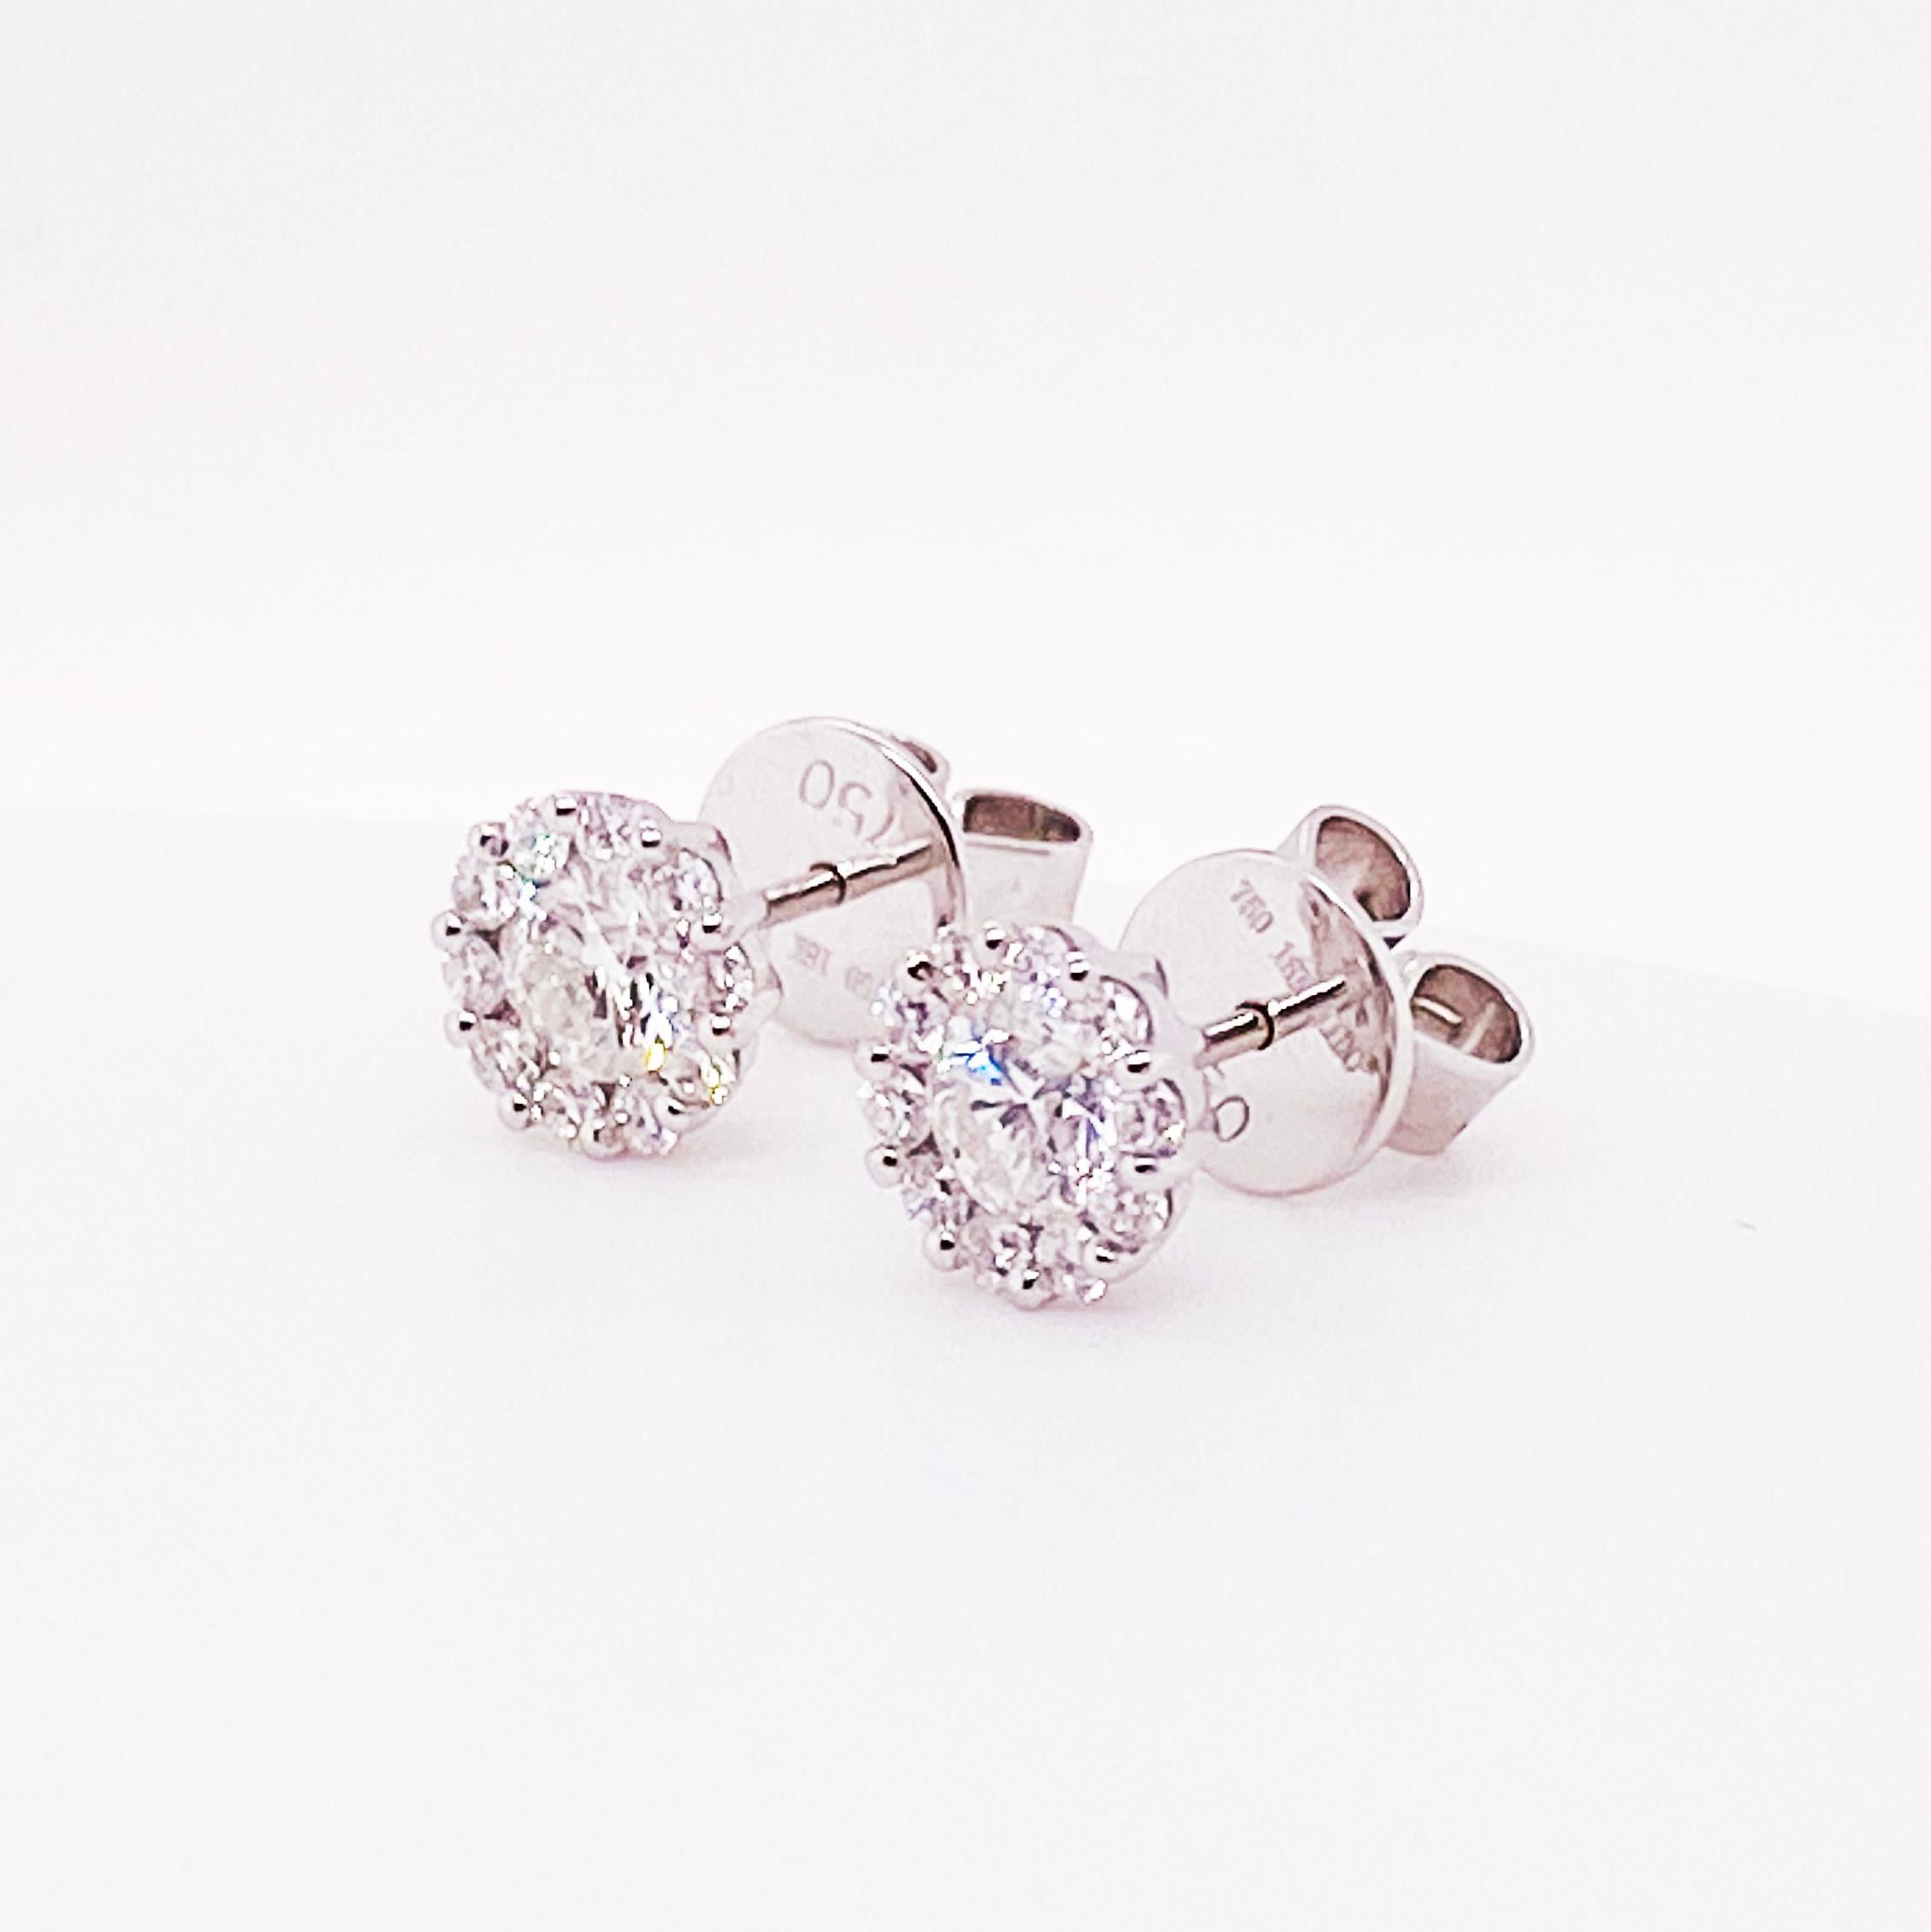 The adorable diamond studs are designed with genuine, natural diamonds and precious metal, 18k gold. The diamond earrings have a round brilliant diamond set in a round brilliant diamond halo frame. The diamonds are set securely and close together